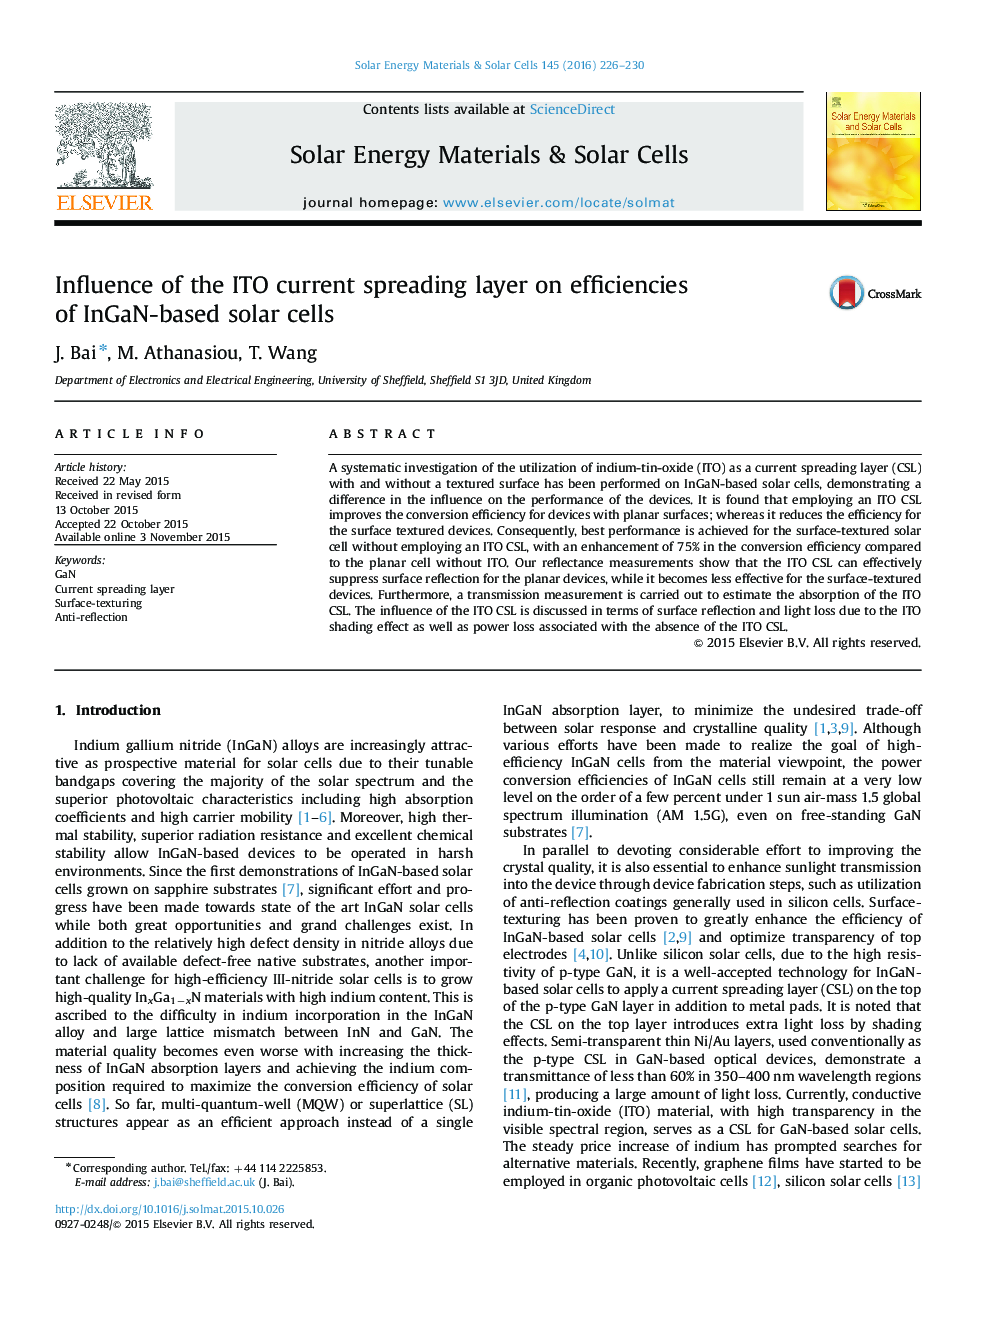 Influence of the ITO current spreading layer on efficiencies of InGaN-based solar cells